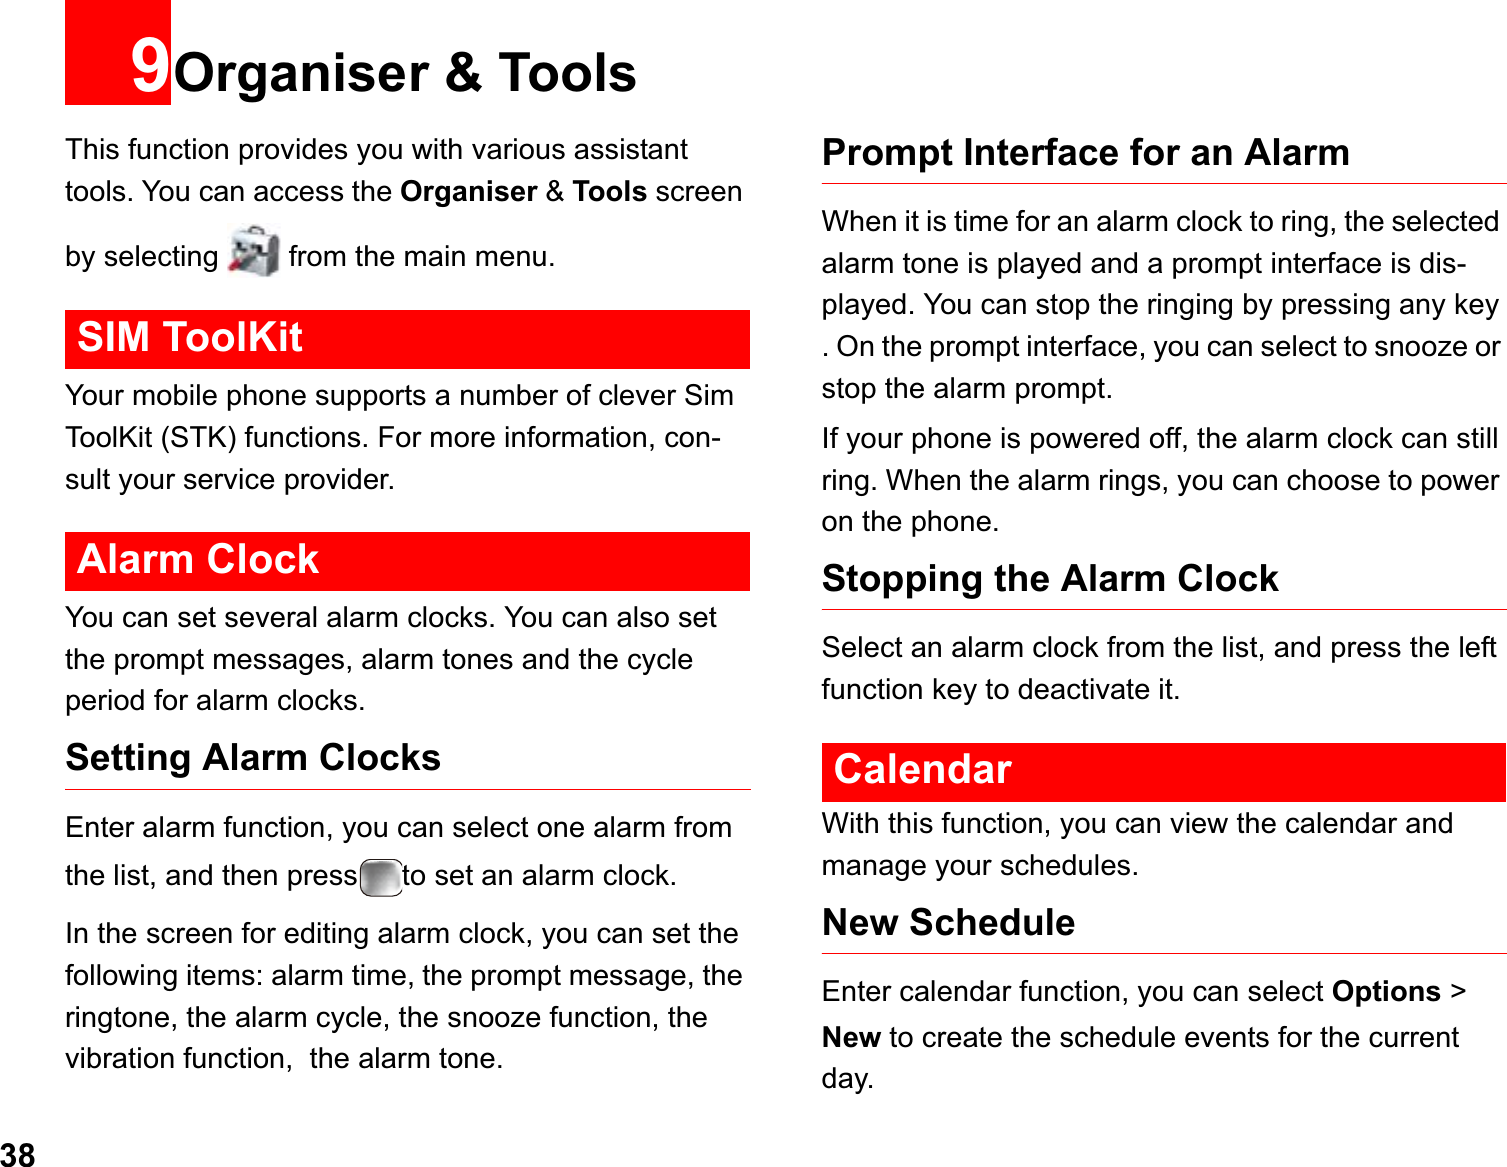 389Organiser &amp; ToolsThis function provides you with various assistant tools. You can access the Organiser &amp; Tools screen by selecting   from the main menu.SIM ToolKitYour mobile phone supports a number of clever Sim ToolKit (STK) functions. For more information, con-sult your service provider. Alarm ClockYou can set several alarm clocks. You can also set the prompt messages, alarm tones and the cycle period for alarm clocks.  Setting Alarm ClocksEnter alarm function, you can select one alarm from the list, and then press to set an alarm clock.In the screen for editing alarm clock, you can set the following items: alarm time, the prompt message, the ringtone, the alarm cycle, the snooze function, the vibration function,  the alarm tone.Prompt Interface for an AlarmWhen it is time for an alarm clock to ring, the selected alarm tone is played and a prompt interface is dis-played. You can stop the ringing by pressing any key . On the prompt interface, you can select to snooze or stop the alarm prompt.If your phone is powered off, the alarm clock can still ring. When the alarm rings, you can choose to power on the phone.Stopping the Alarm ClockSelect an alarm clock from the list, and press the left function key to deactivate it.CalendarWith this function, you can view the calendar and manage your schedules.New ScheduleEnter calendar function, you can select Options &gt; New to create the schedule events for the currentday.